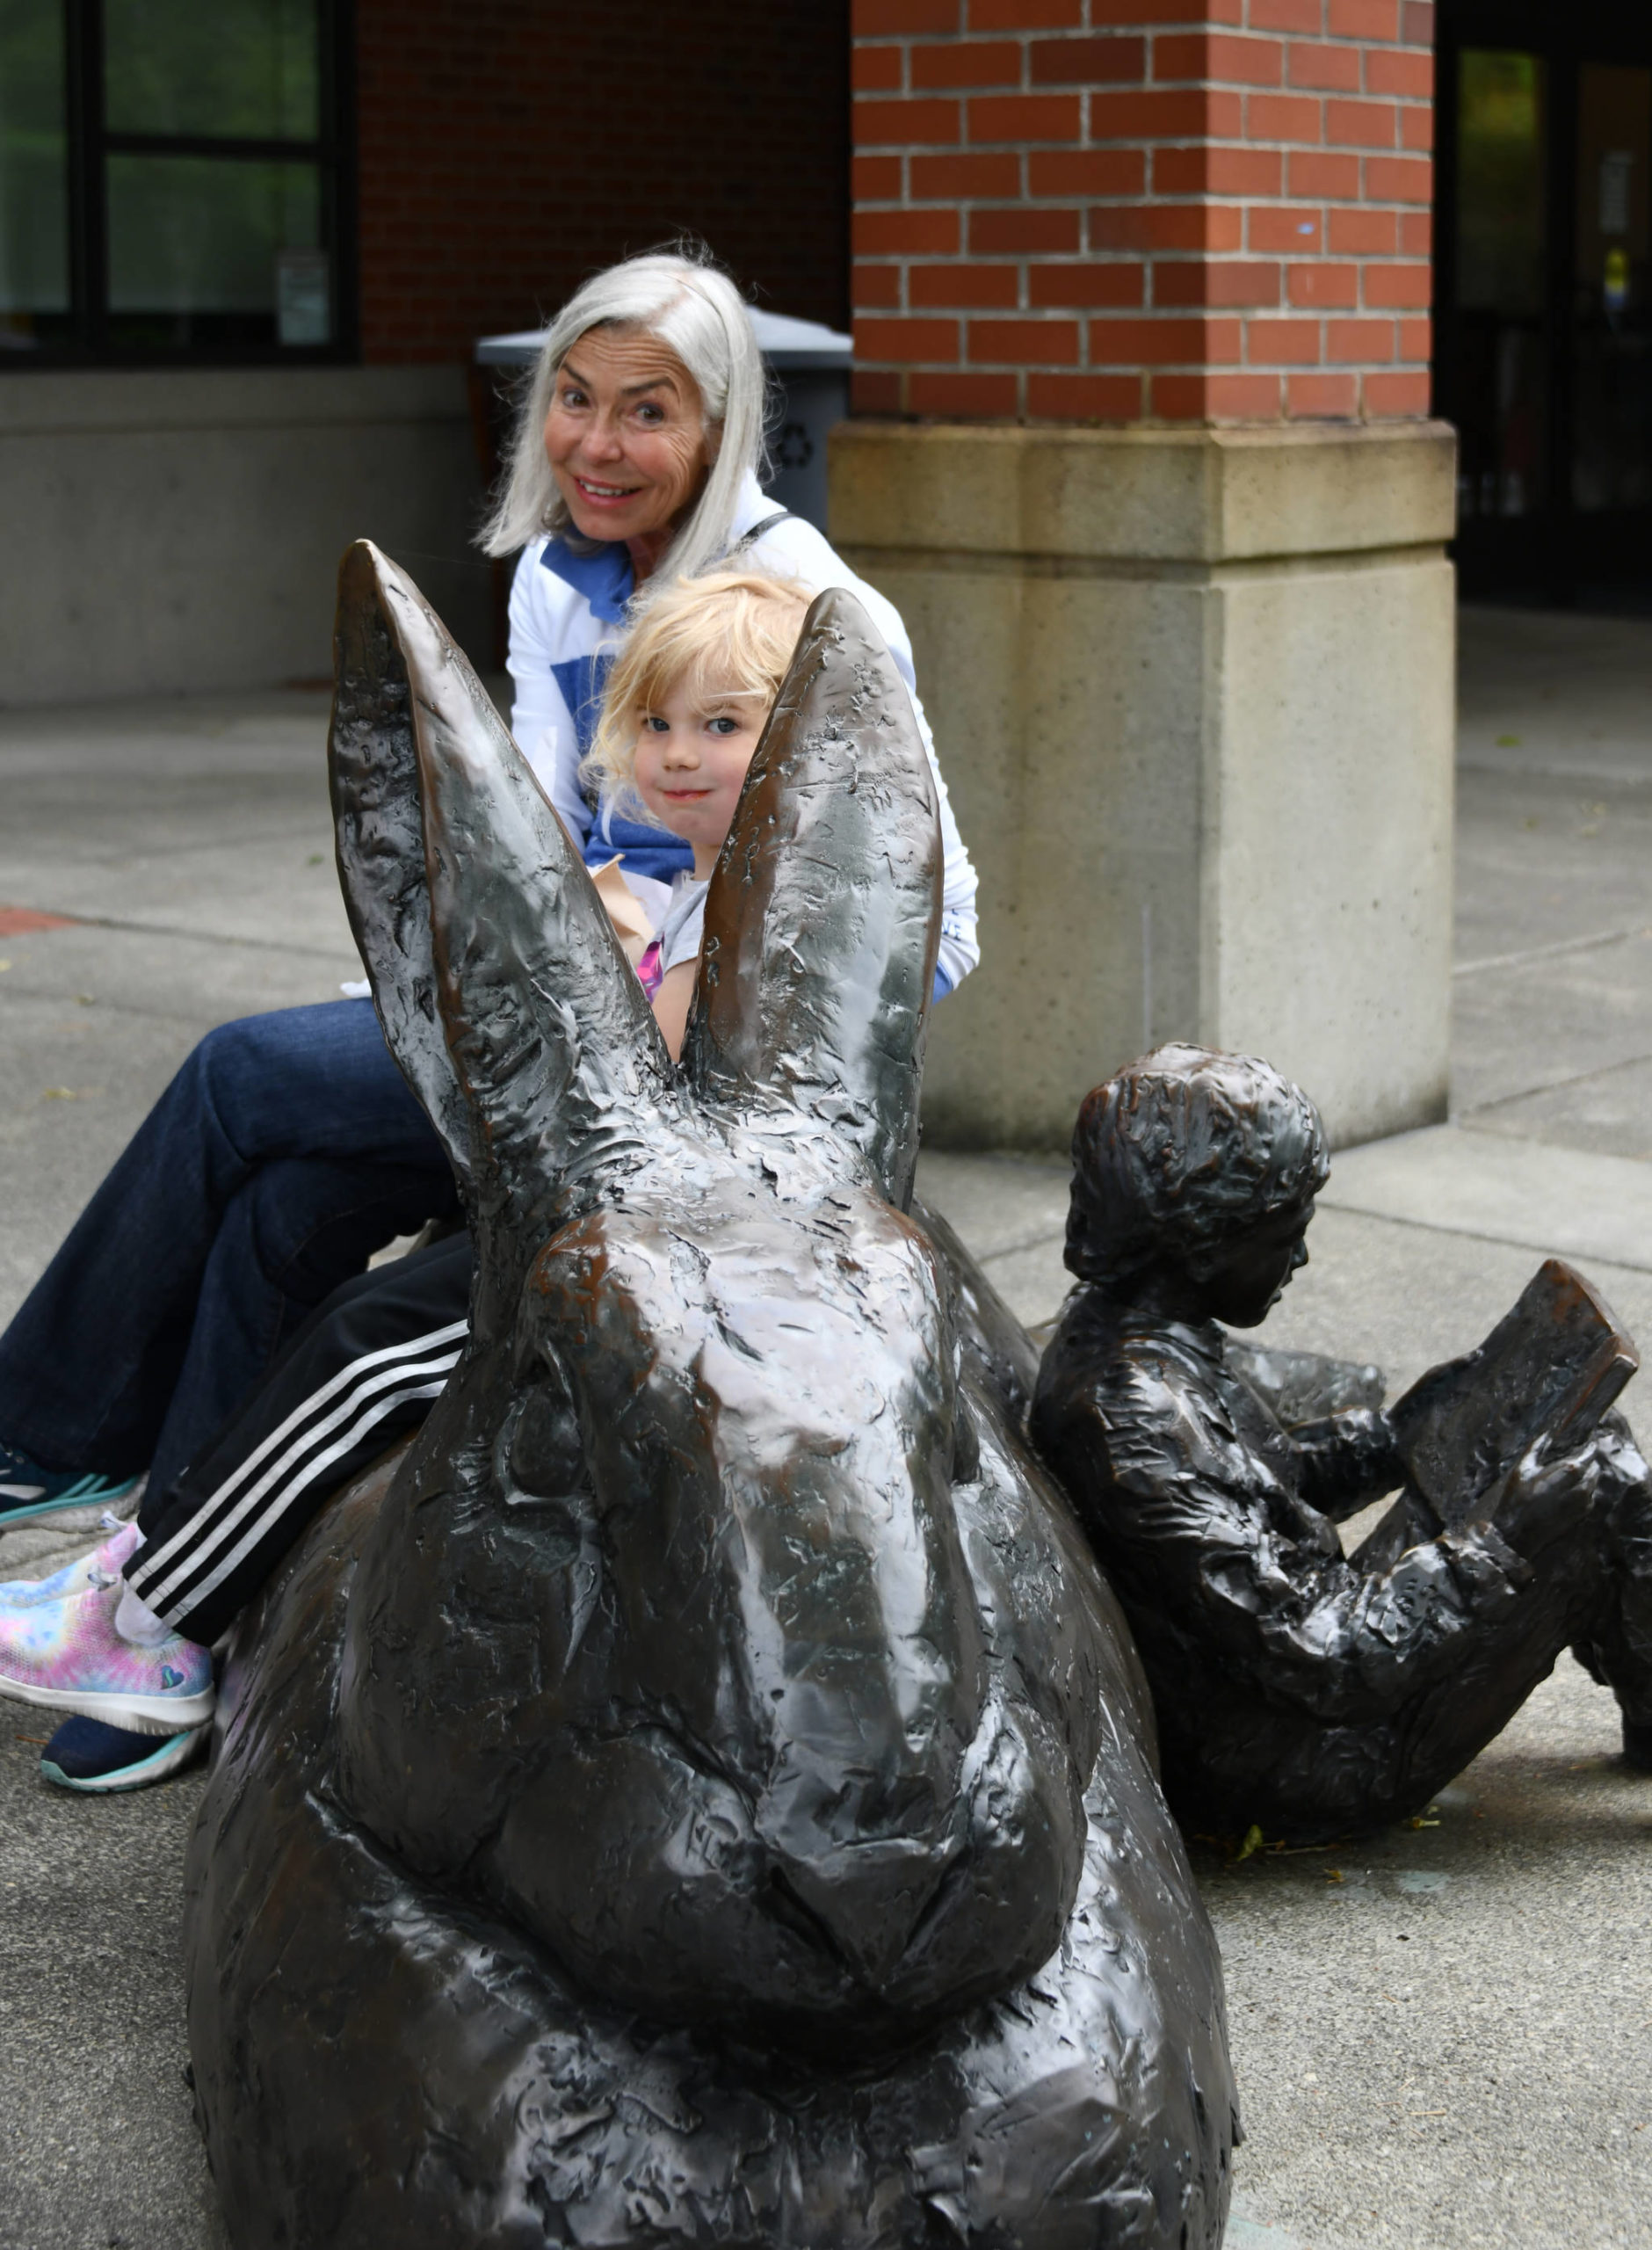 Linda Lisbakken sits with her granddaughter, Berrit Martz, 4, prior to the reopening of the Mercer Island Library on July 7. They were excitedly waiting for the doors to open while partaking in their lunch on the library’s signature rabbit statue. The library — located at 4400 88th Ave. SE — had been closed since March of 2020 when the COVID-19 pandemic hit. Doors will be open from 1-8 p.m. Tuesdays and Wednesdays and from 10 a.m. to 5 p.m. Thursdays, Fridays and Saturdays. Andy Nystrom/ staff photo